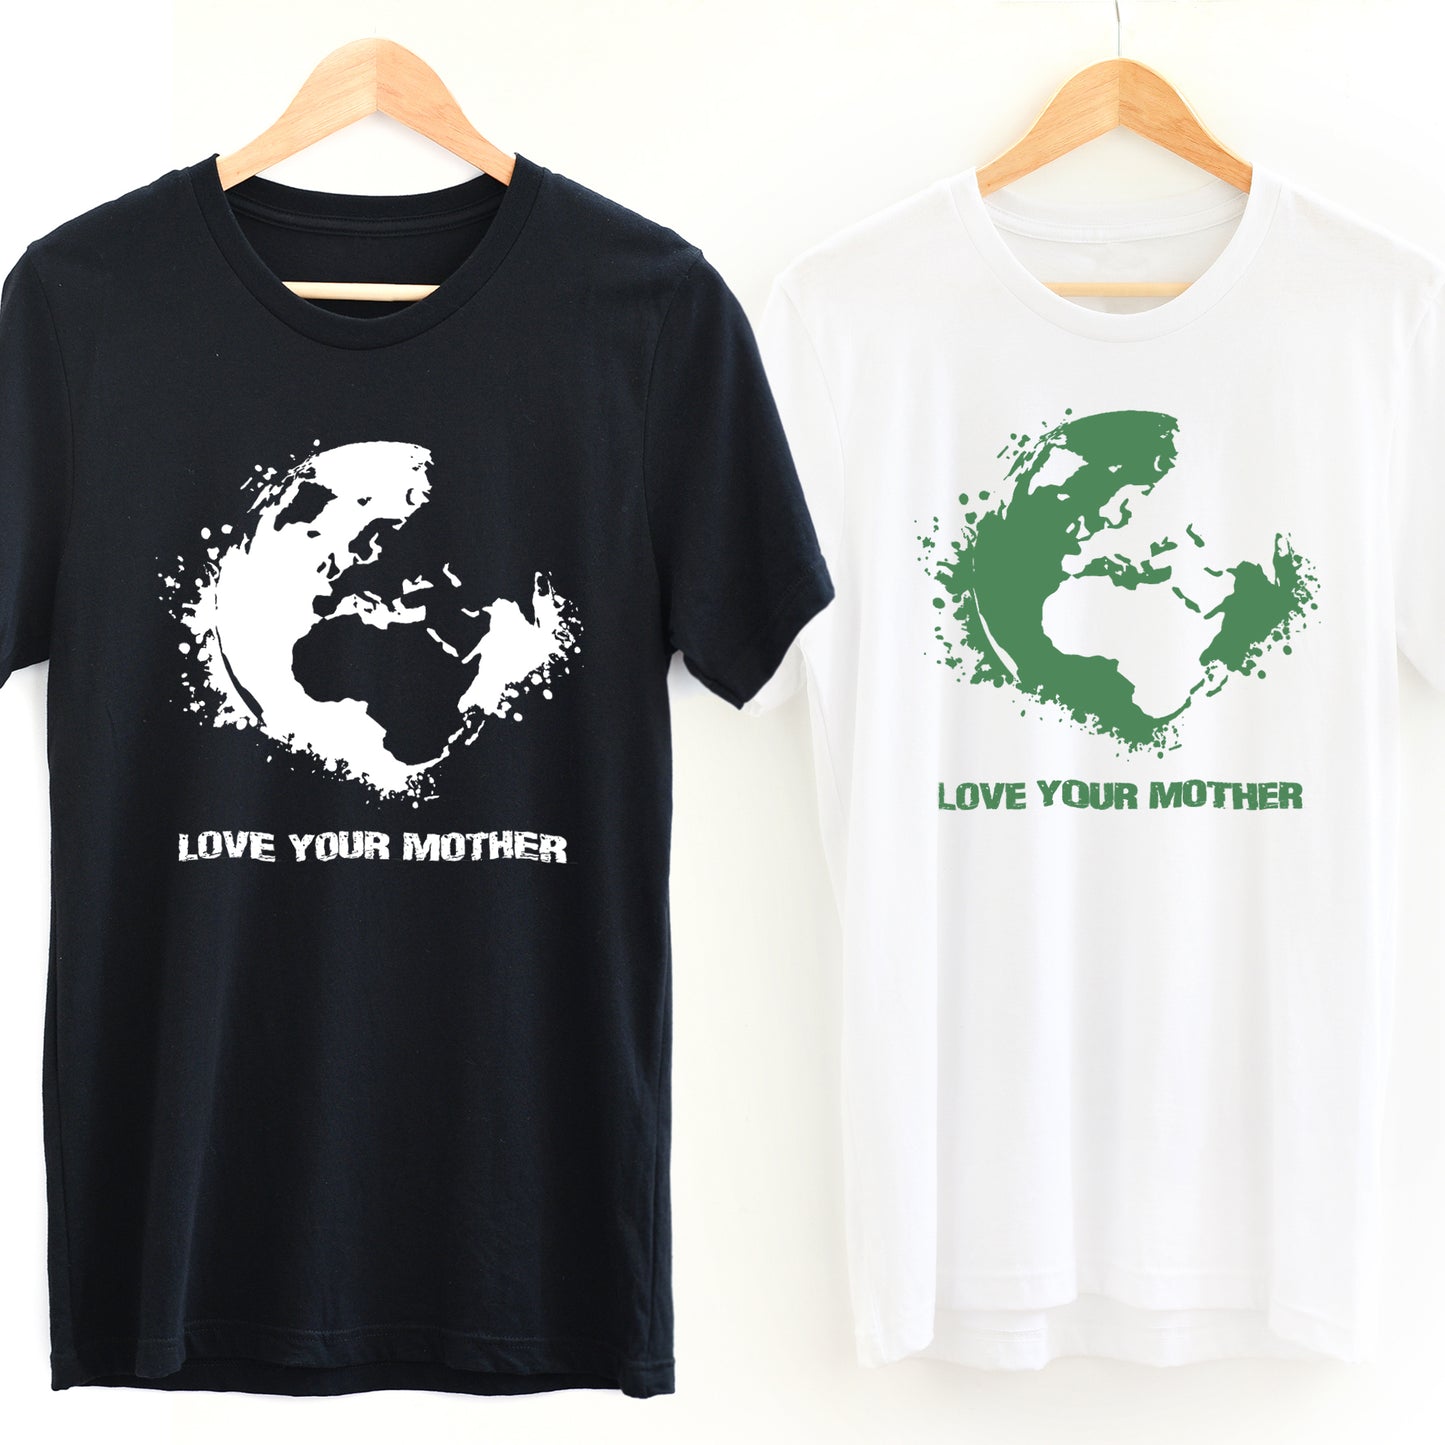 Black *Organic* Love Your Mother Earth Short-Sleeve Tee with white design and White *Organic* Love Your Mother Earth Short-Sleeve Tee with green design - sweetsherriloudesigns - 10% of profits donated to the Environmental Defense Fund